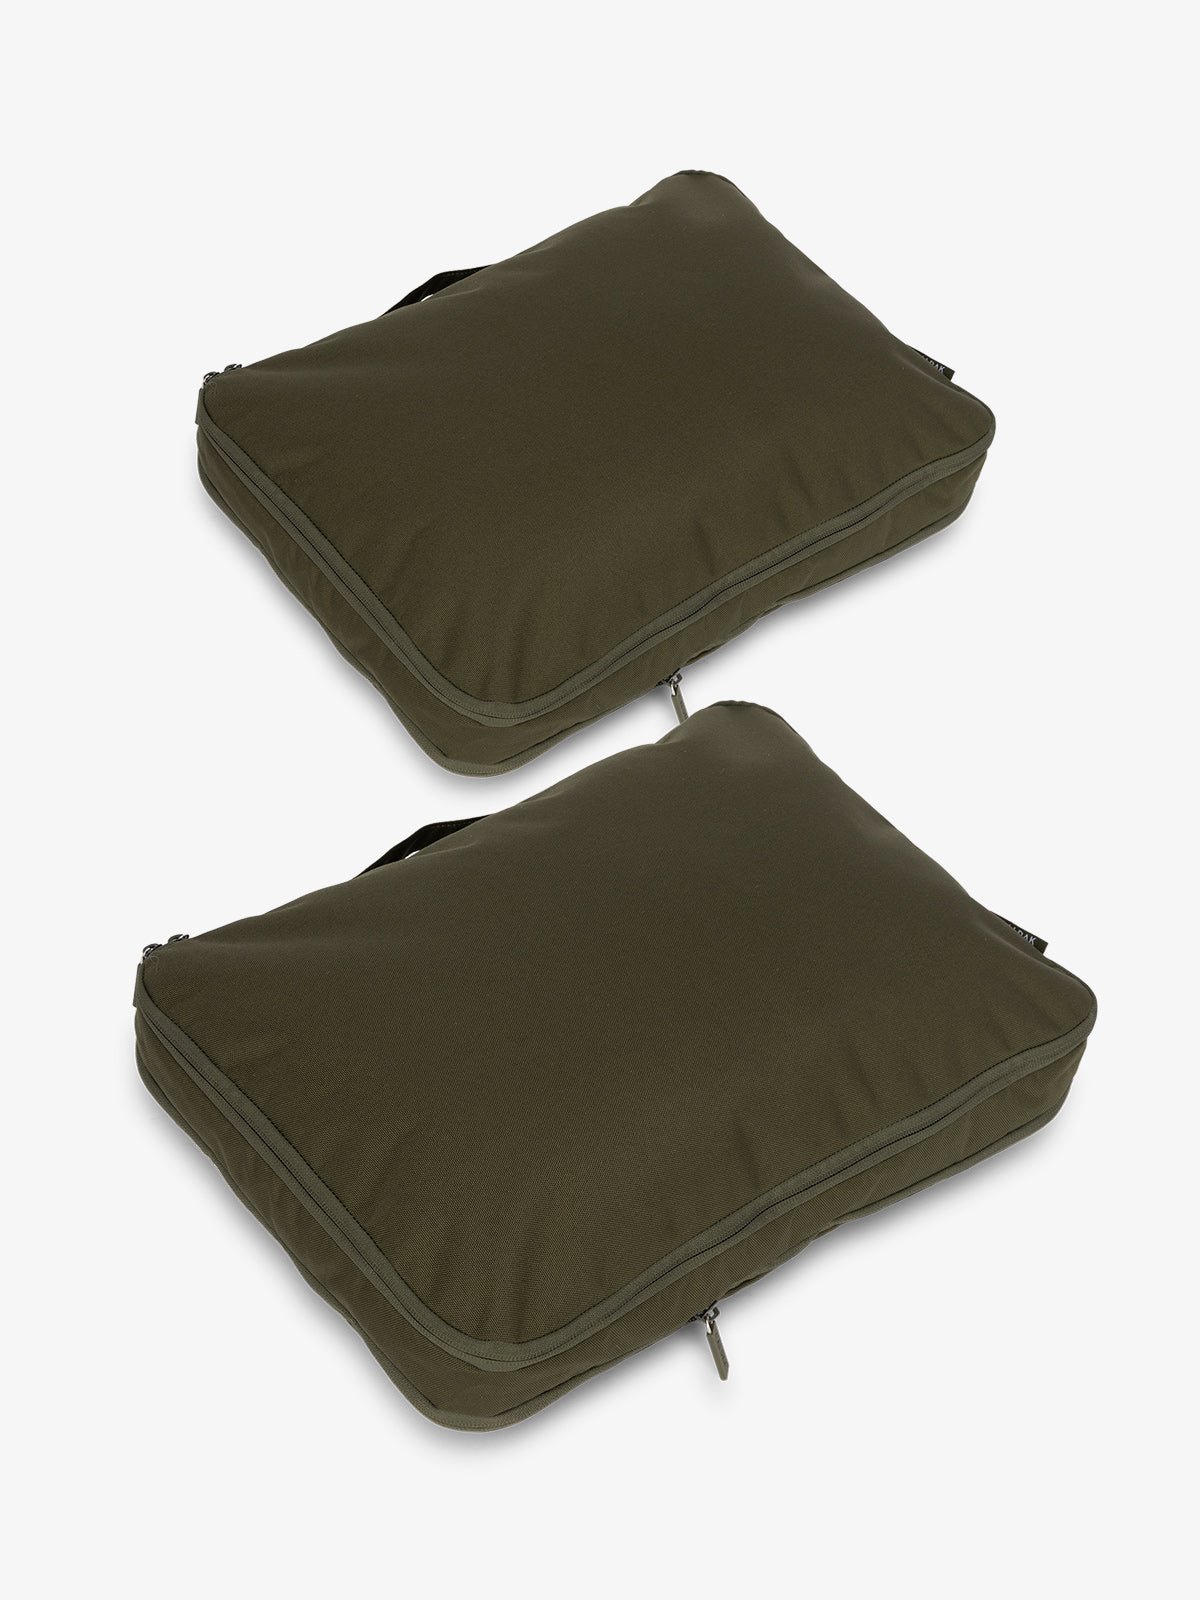 CALPAK large compression packing cubes in moss